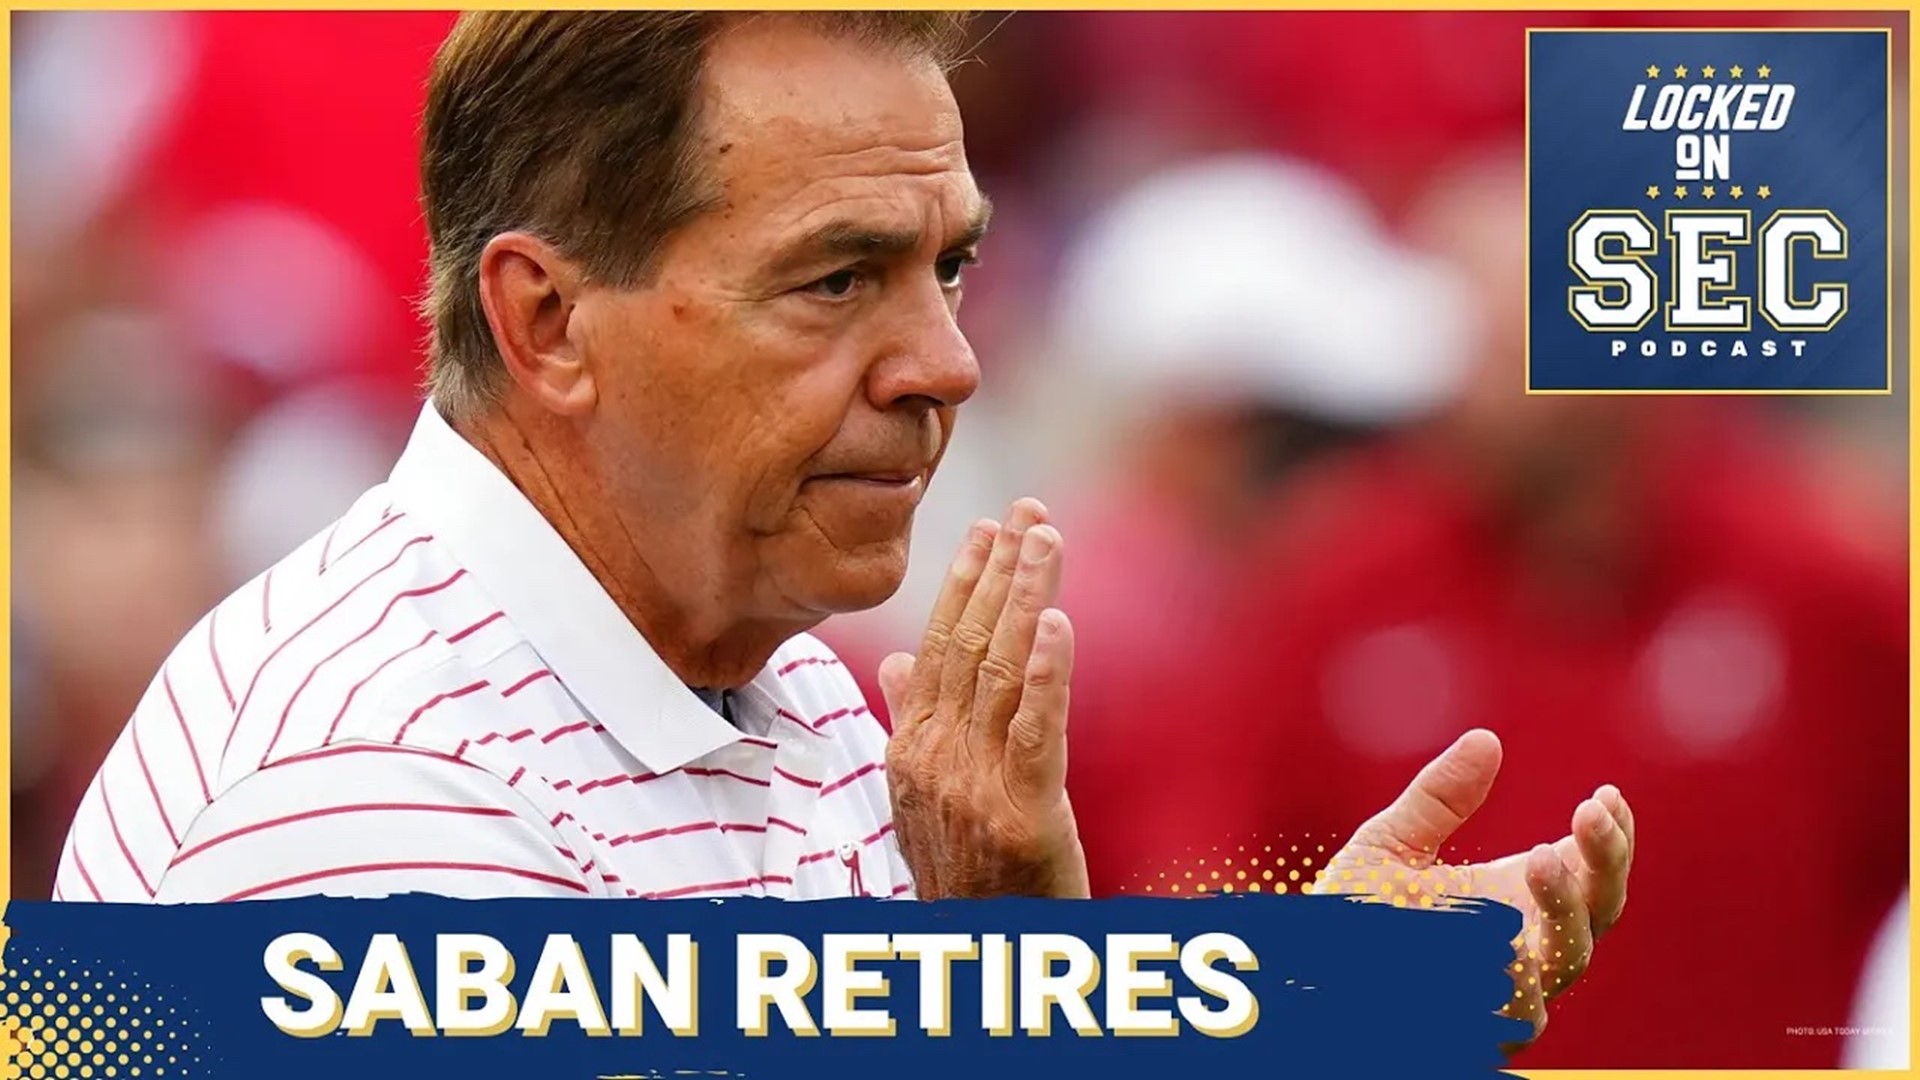 We are reacting to the breaking news that Alabama head coach Nick Saban has retired after 28 seasons as a head coach, with the last 17 years with the Crimson Tide.